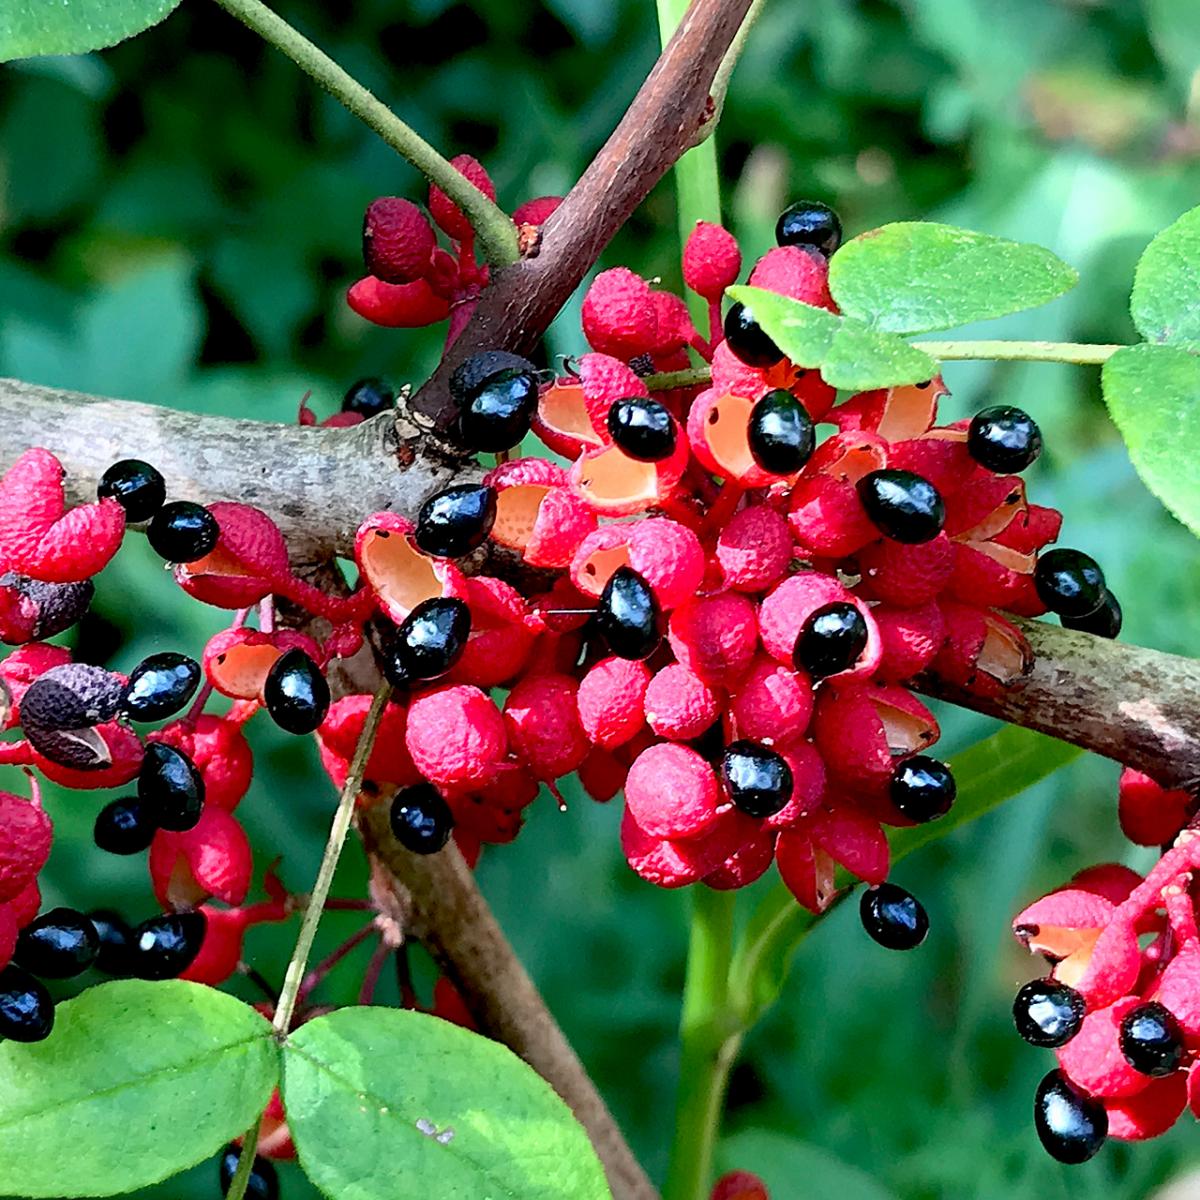 Colour photo of seeds on a tree branch